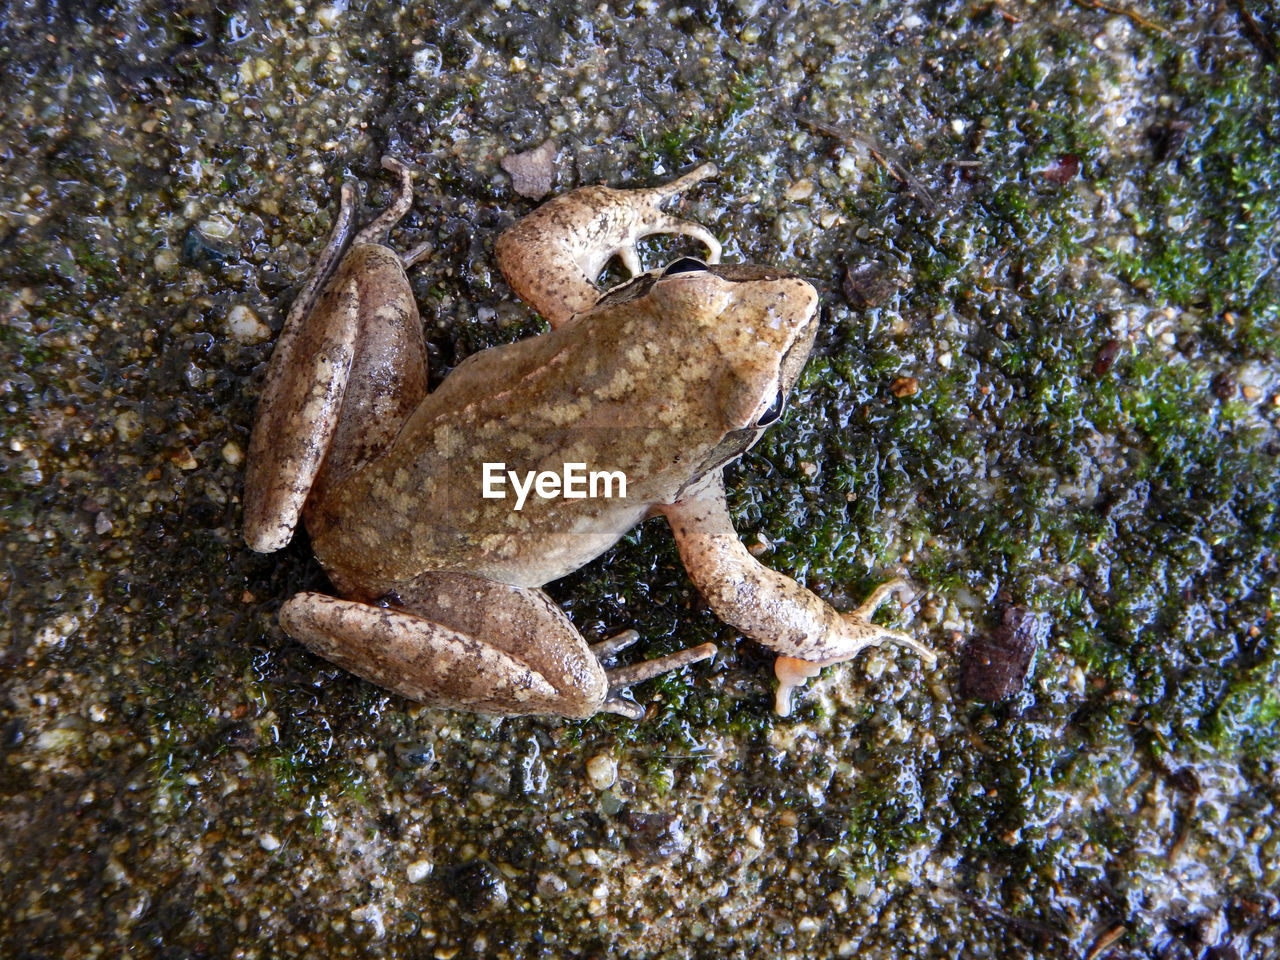 CLOSE-UP OF FROG ON ROCK IN SEA